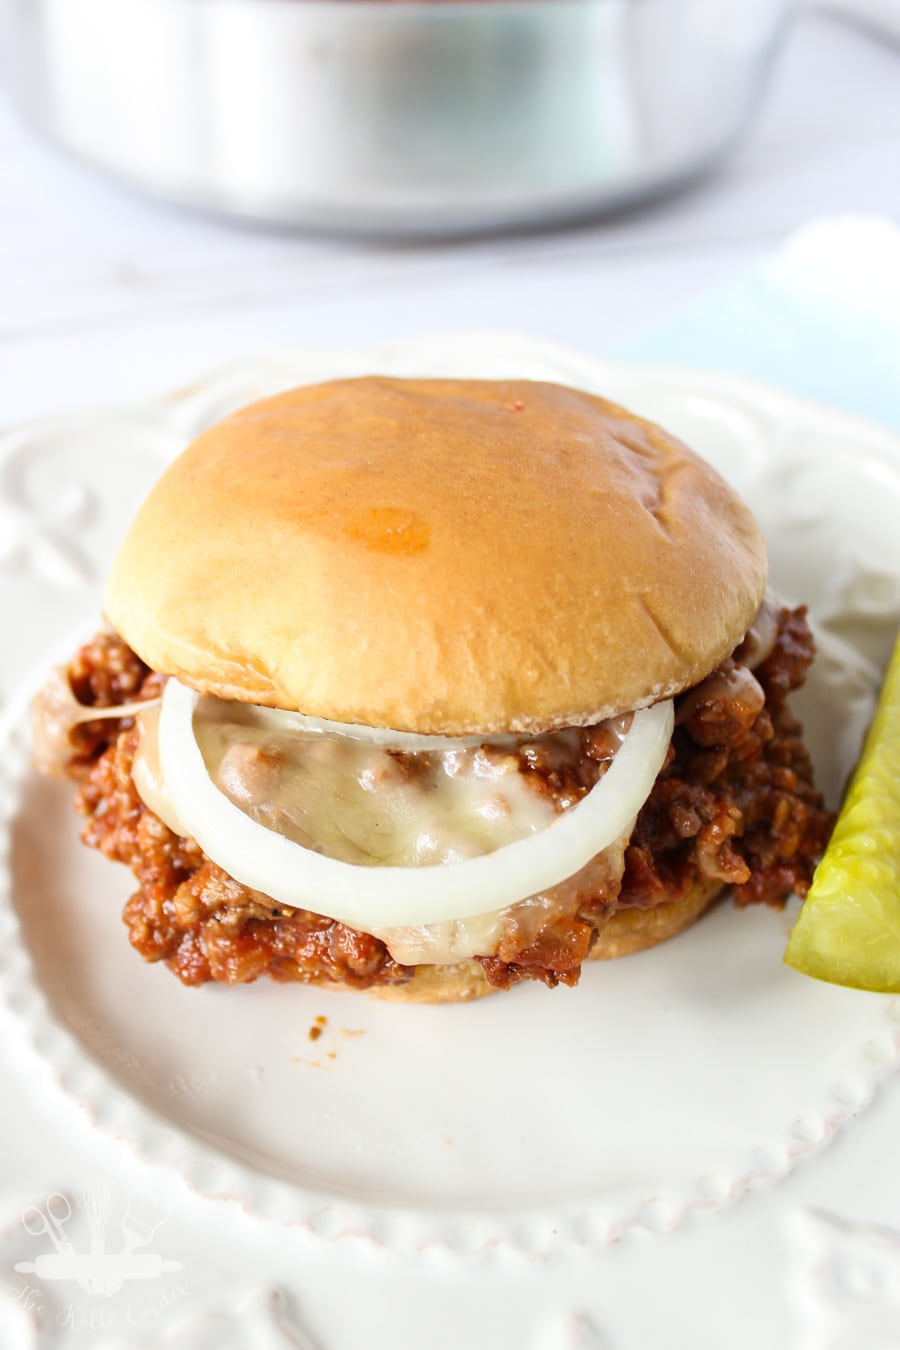 Homemade, delicious and easy to make, these sloppy joes are perfect for busy weeknights or for when you need to get dinner on the table fast.